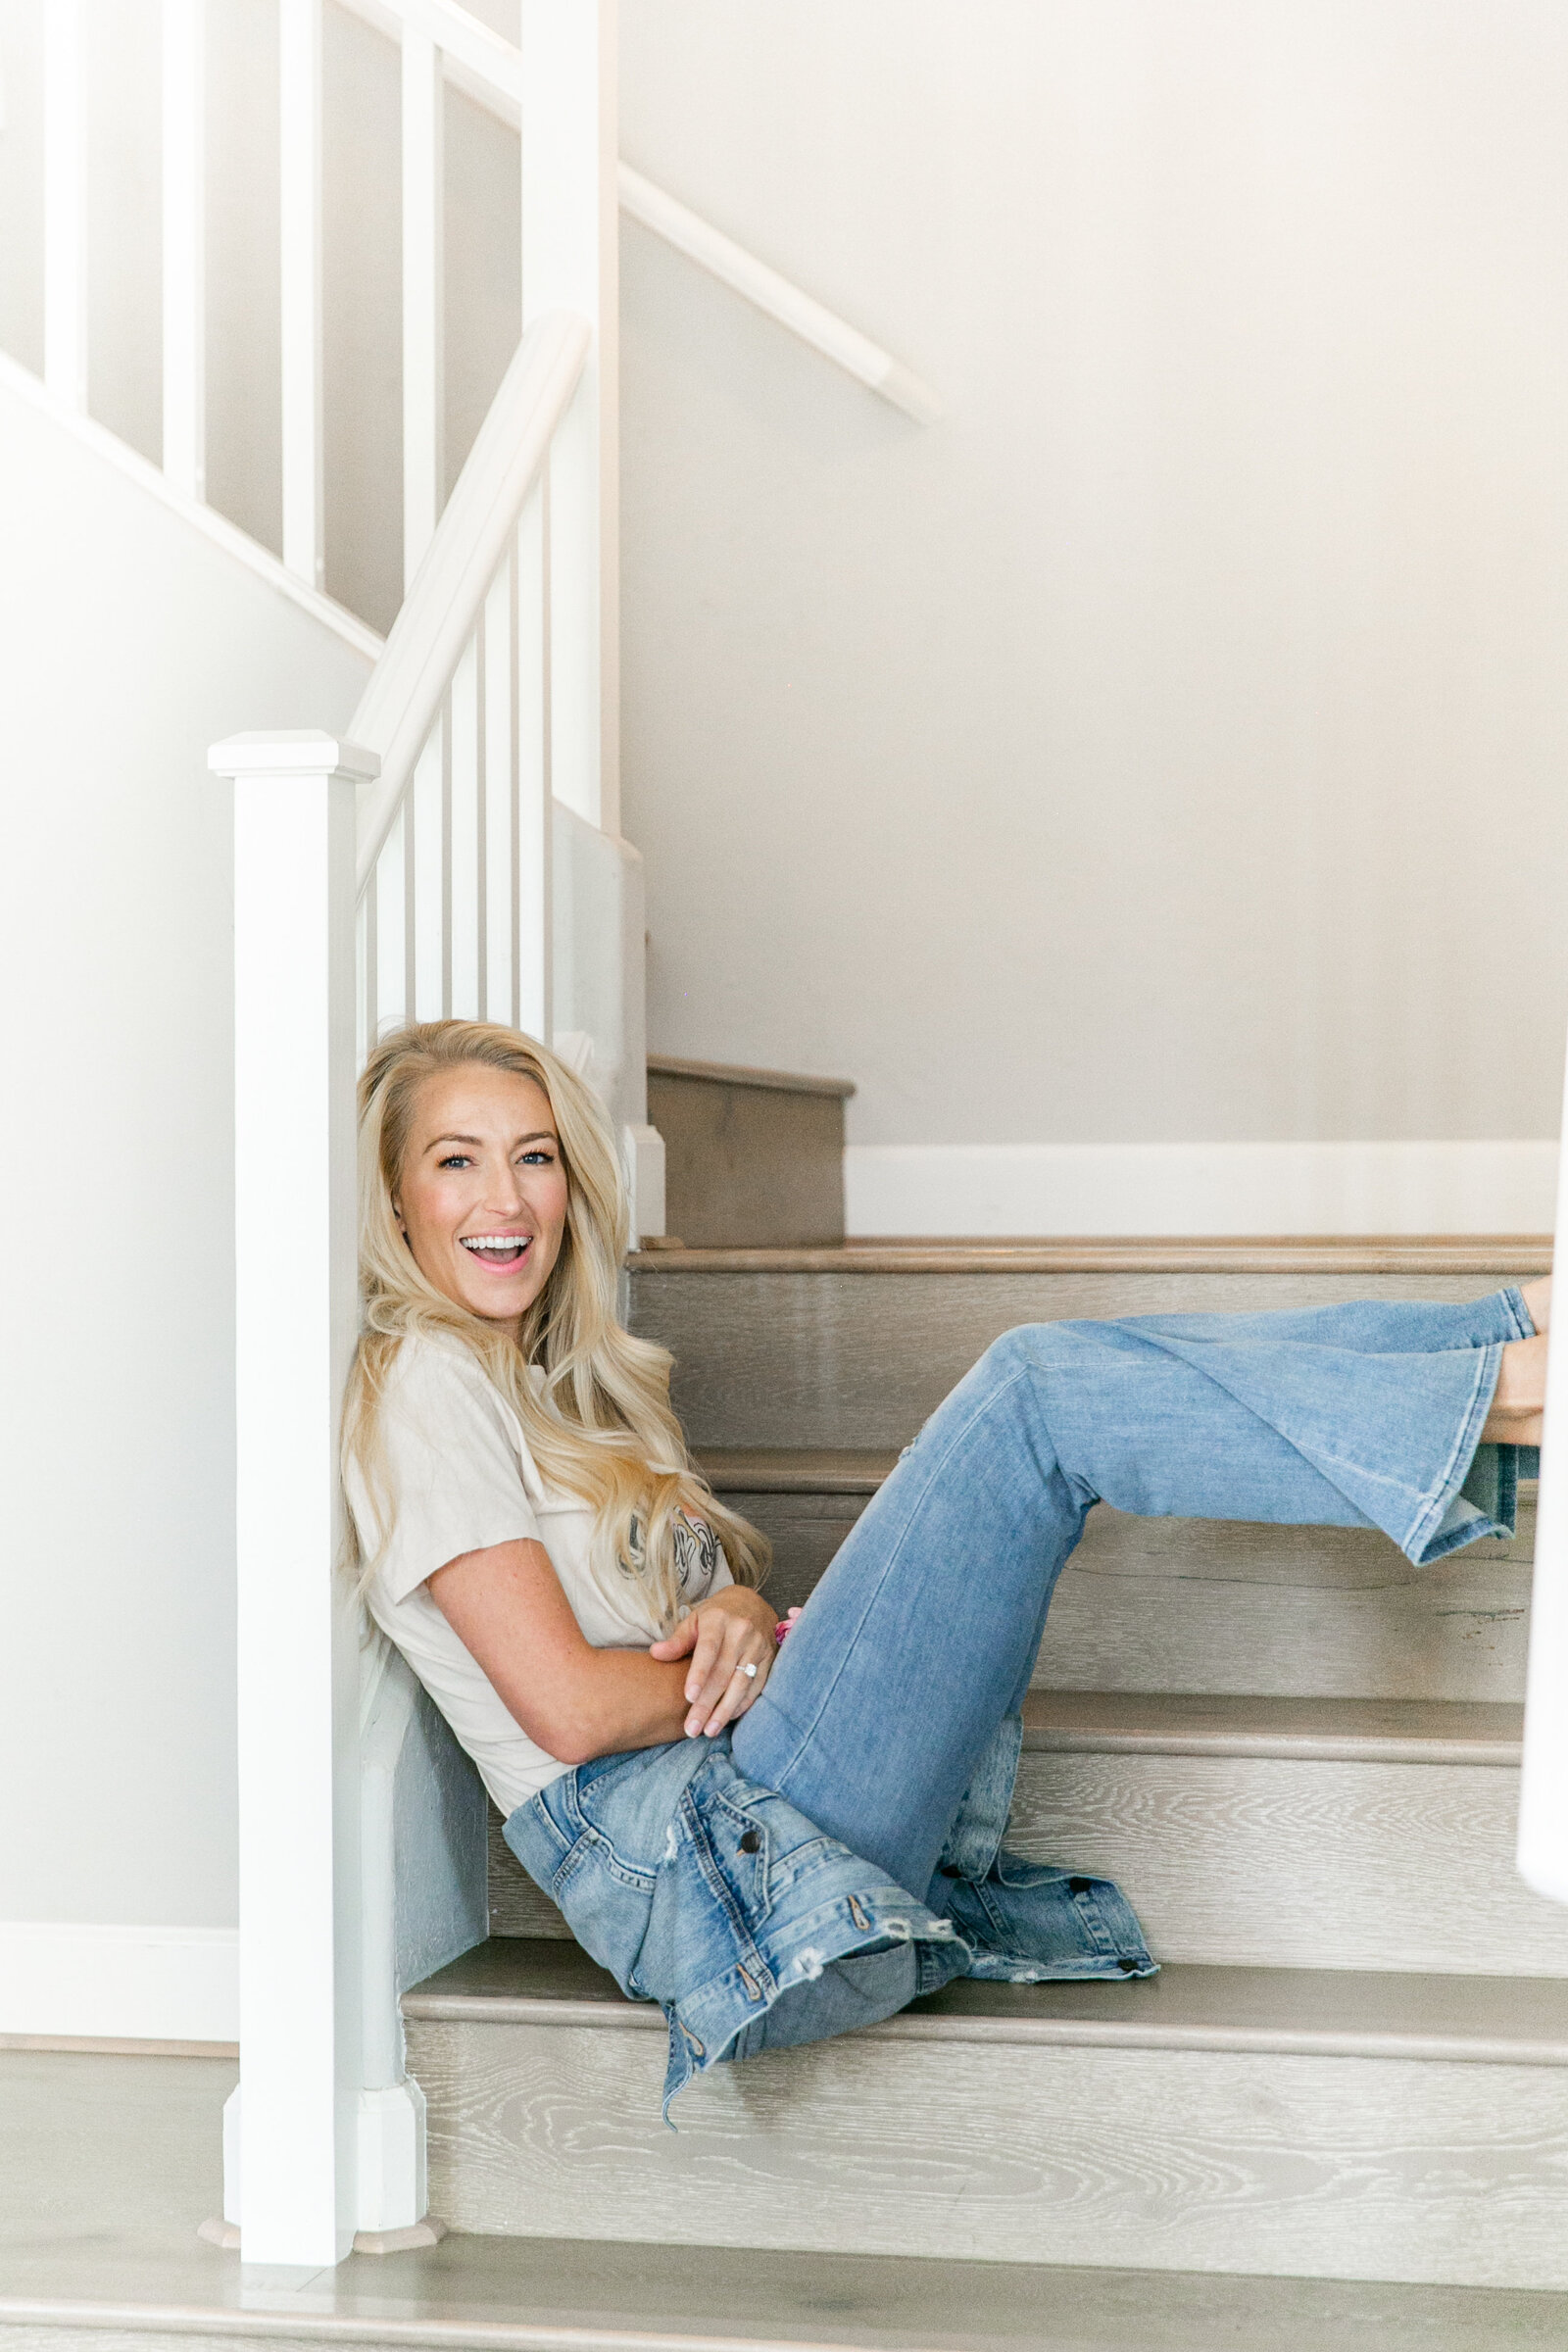 Karlie Colleen Photography - Ashley Gain - Sept 17 2019-44